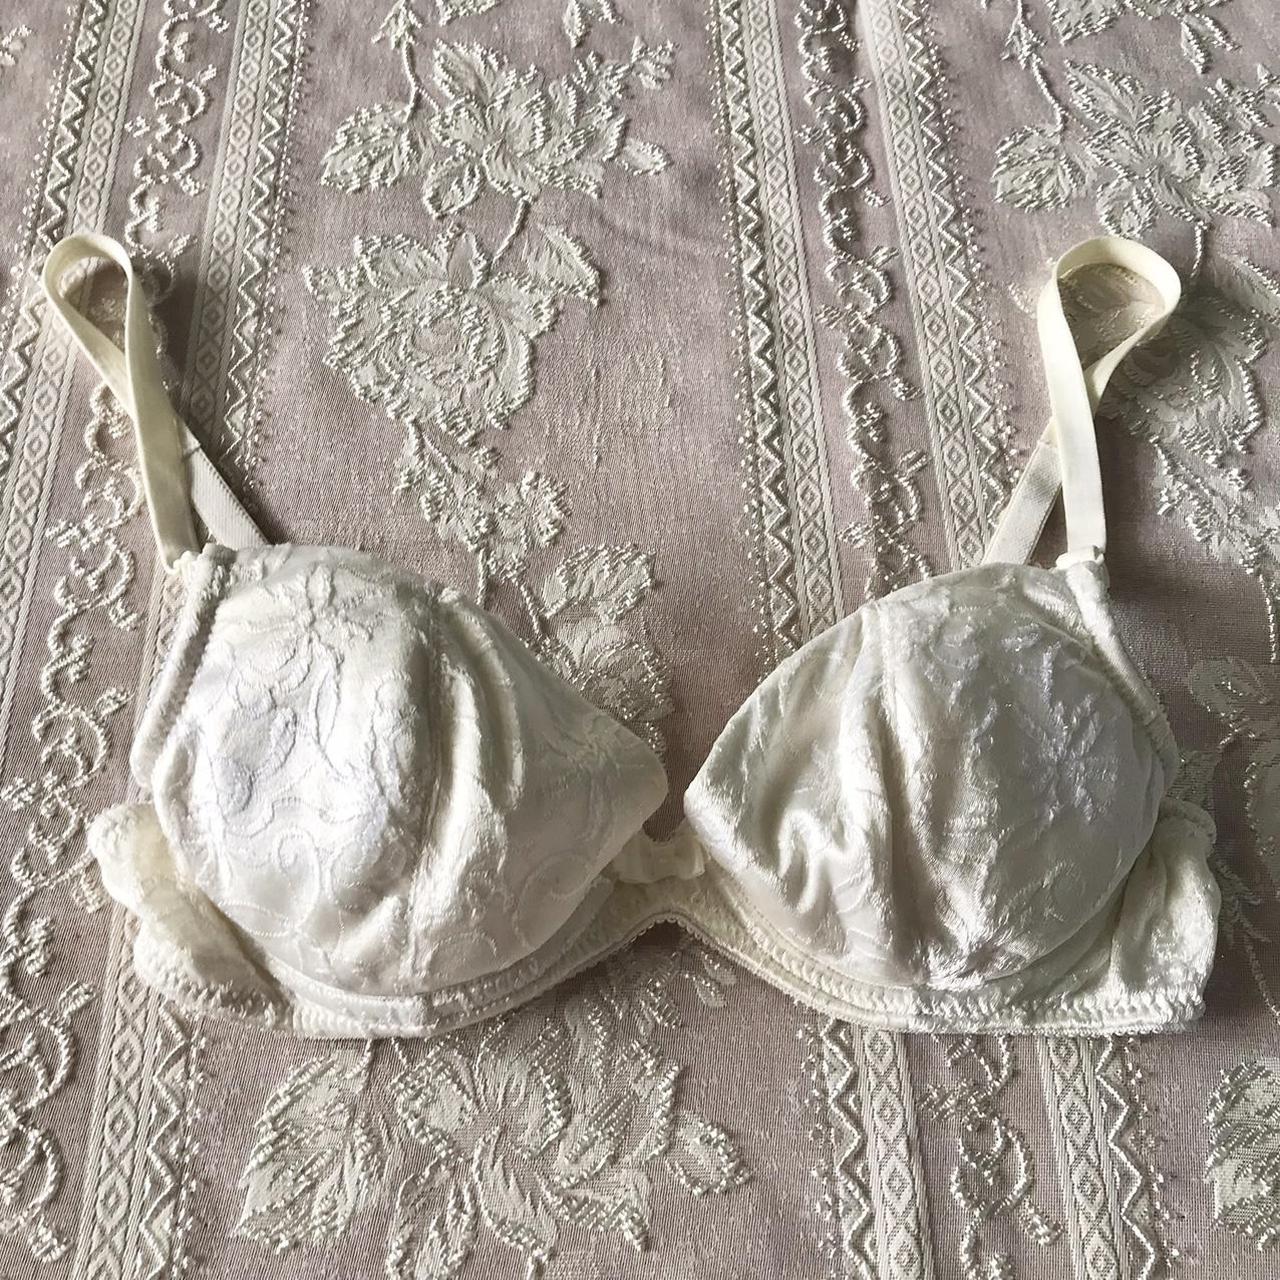 item listed by prettypleasethrift